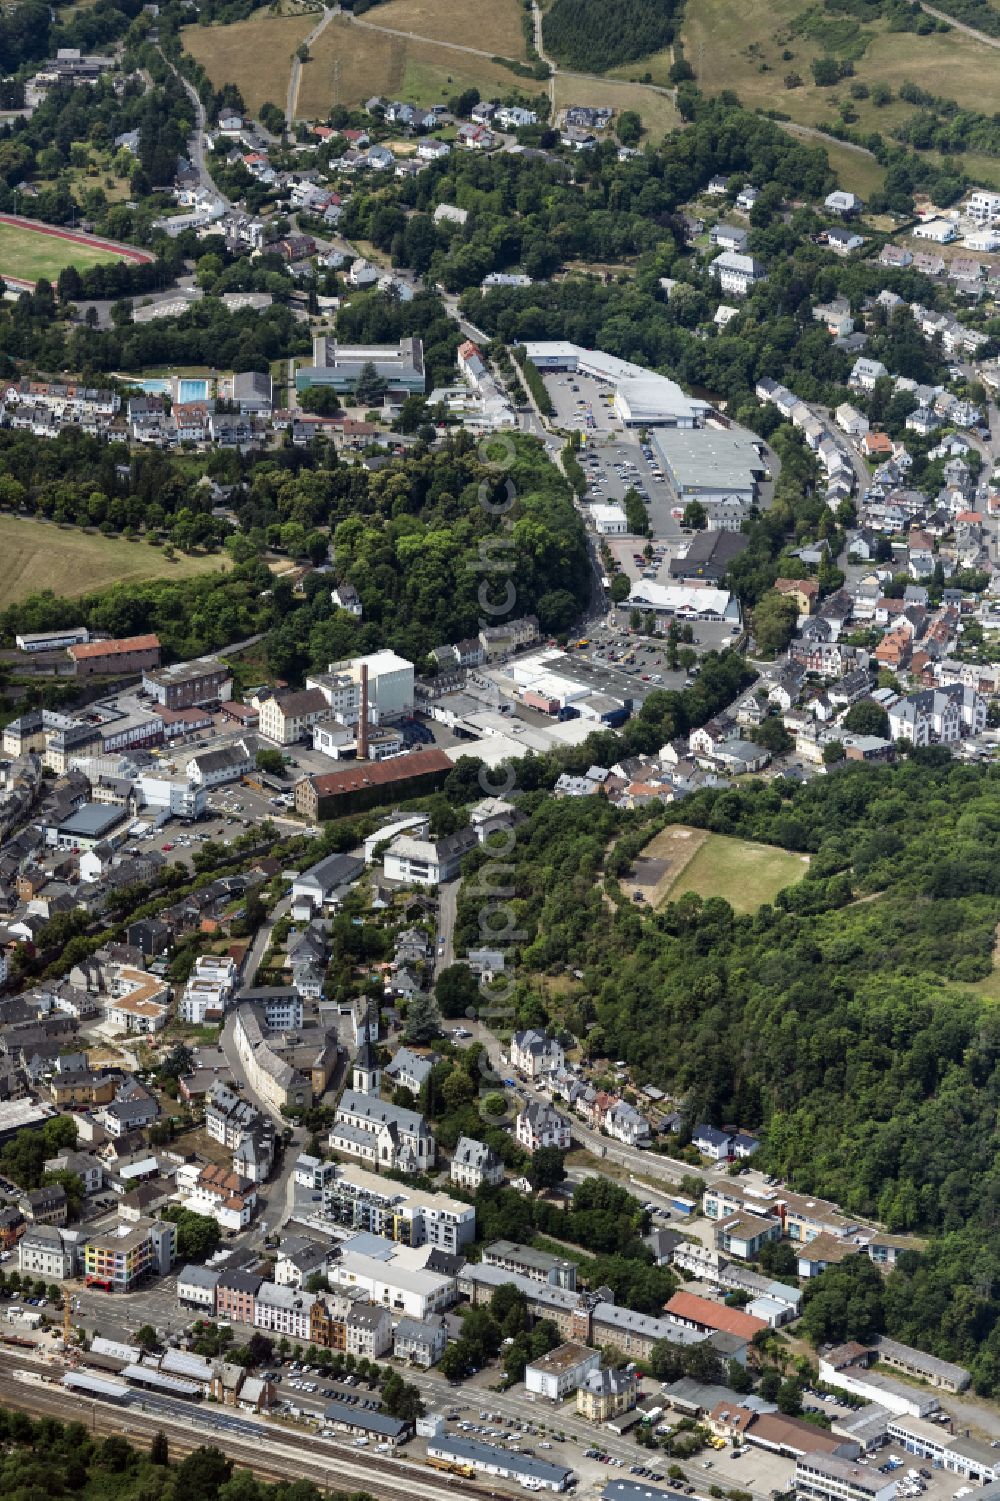 Aerial image Kirn - City view on the river bank of the Nahe river in Kirn in the state Rhineland-Palatinate, Germany